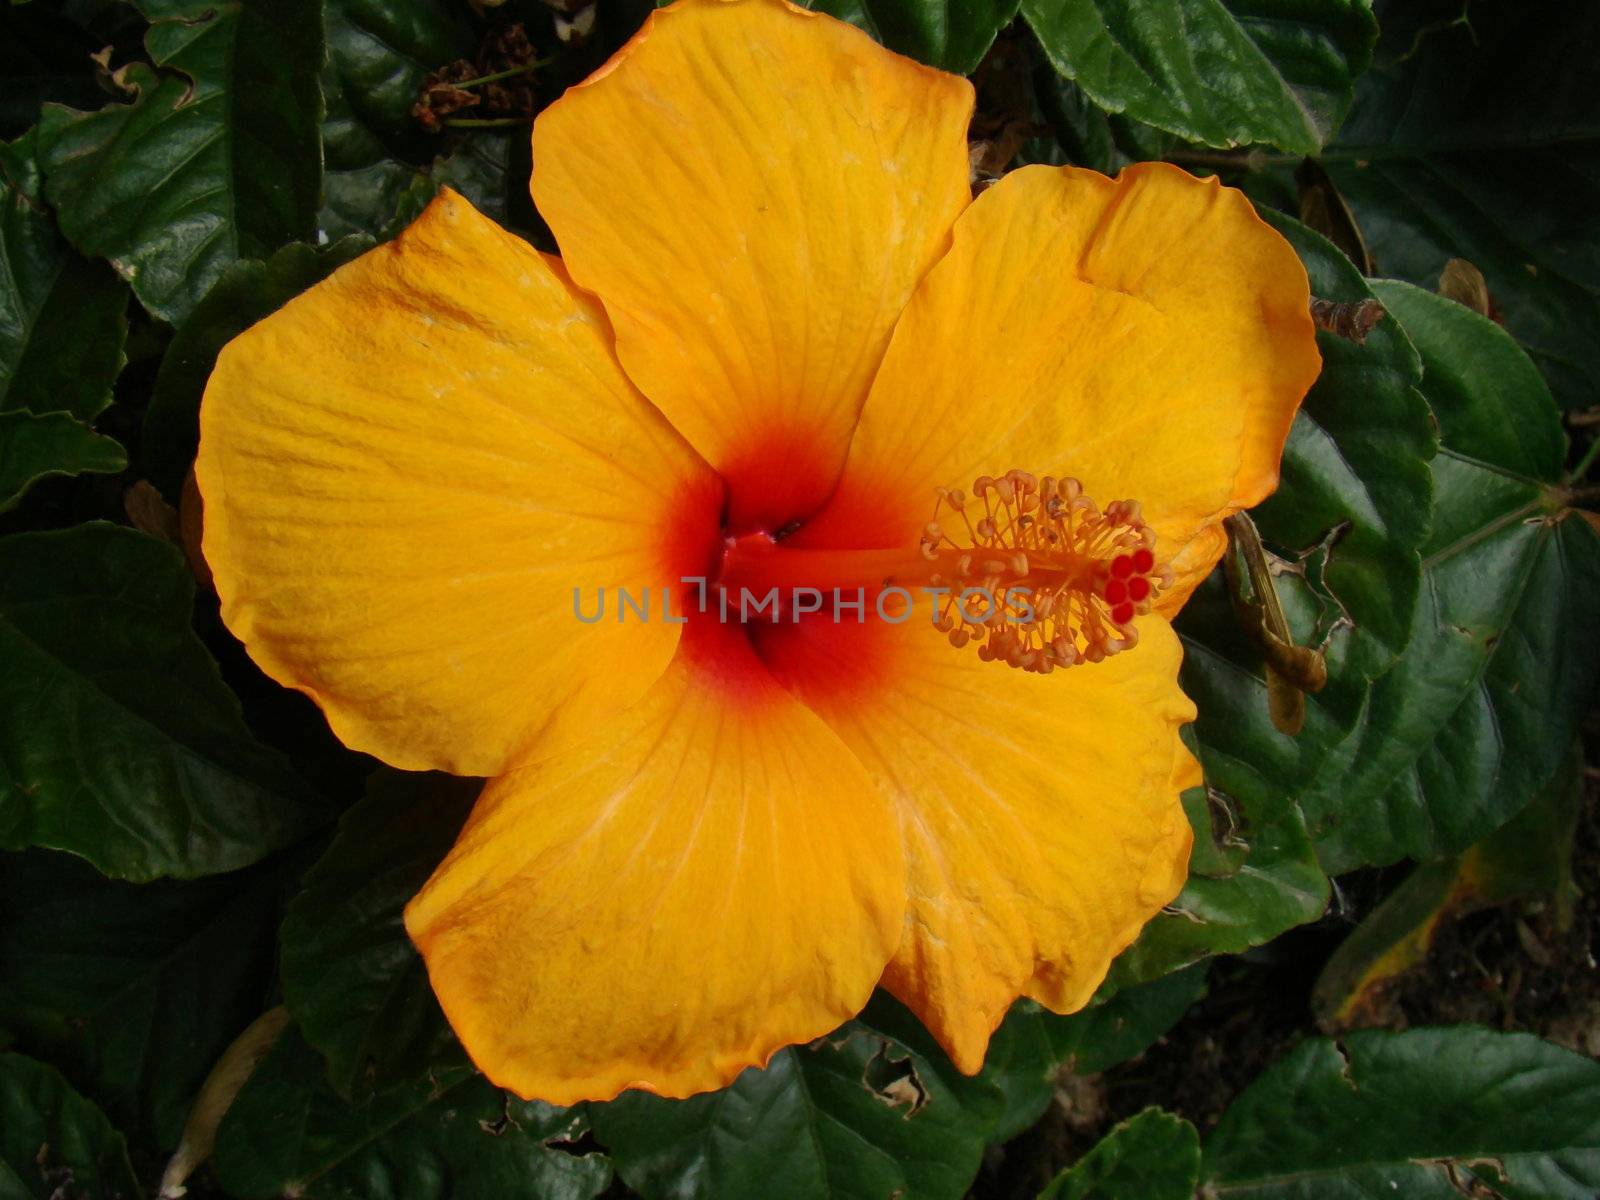 Lovely yellow hibiscus looks 3d with the pistol sticking out